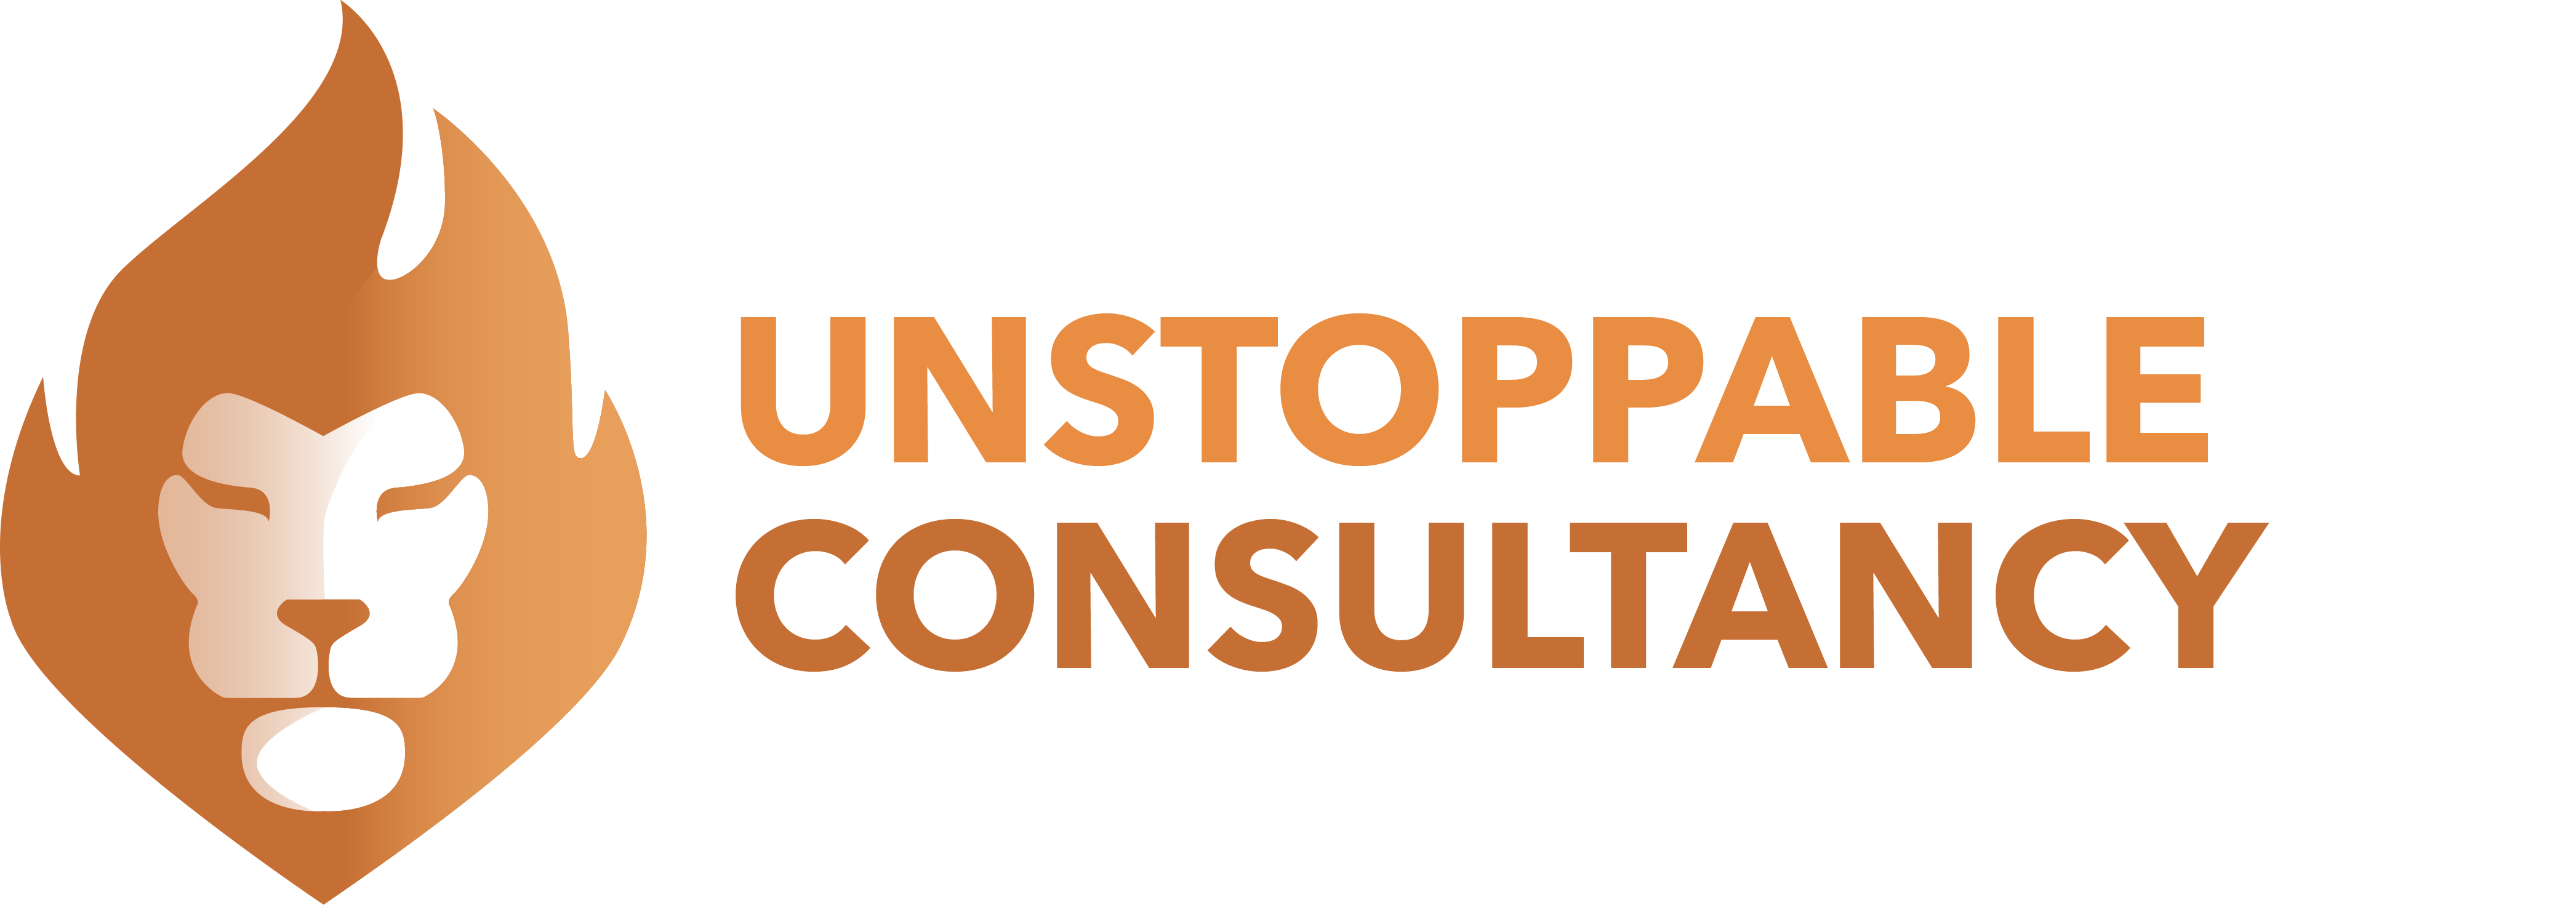 Unstoppable Consultancy